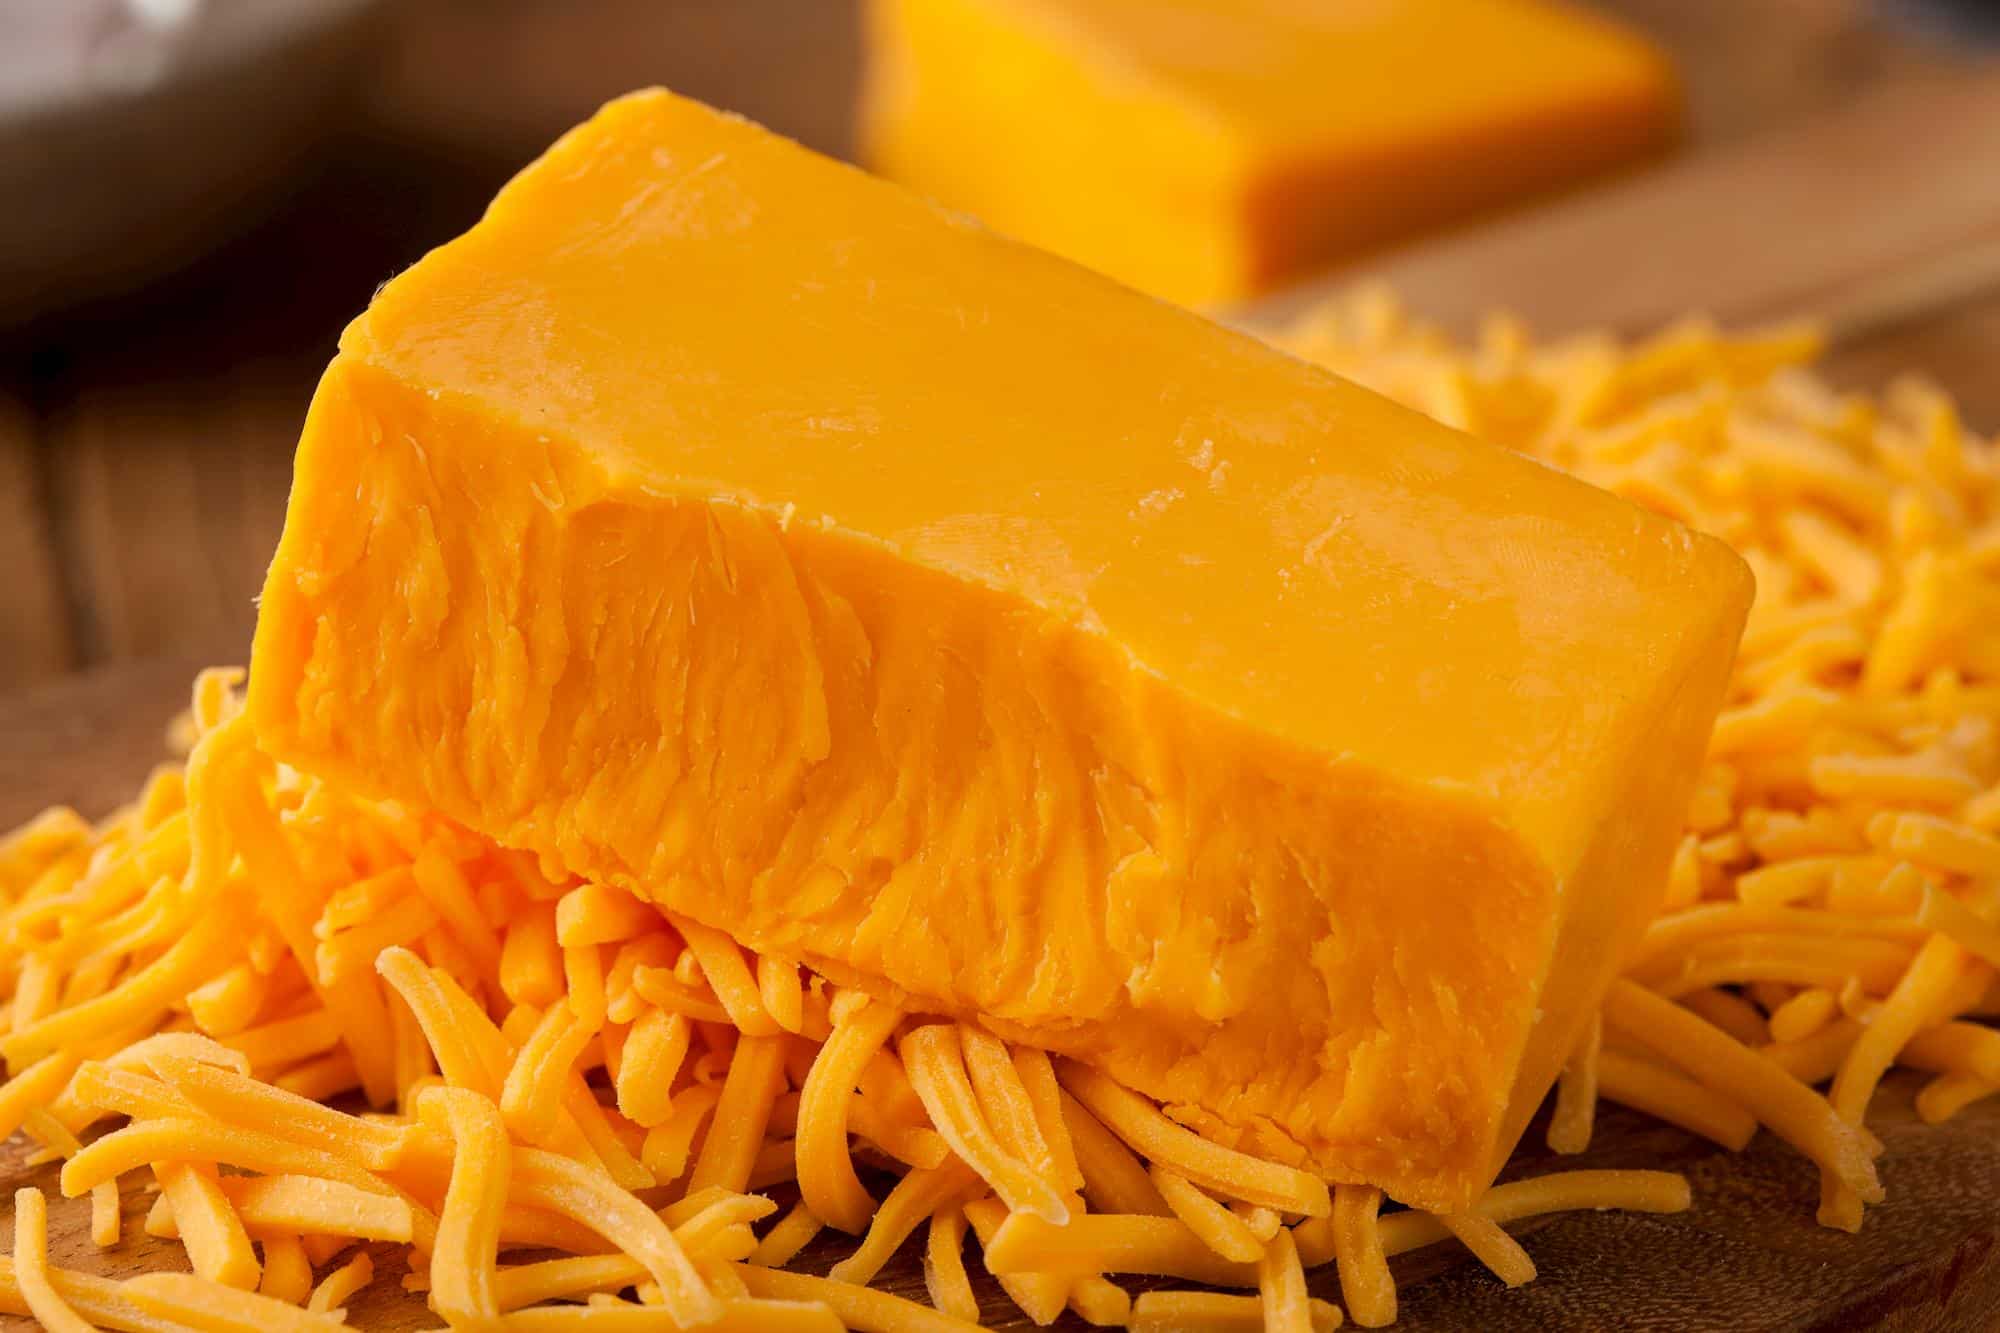 How to Make Cheddar Cheese - My Fermented Foods